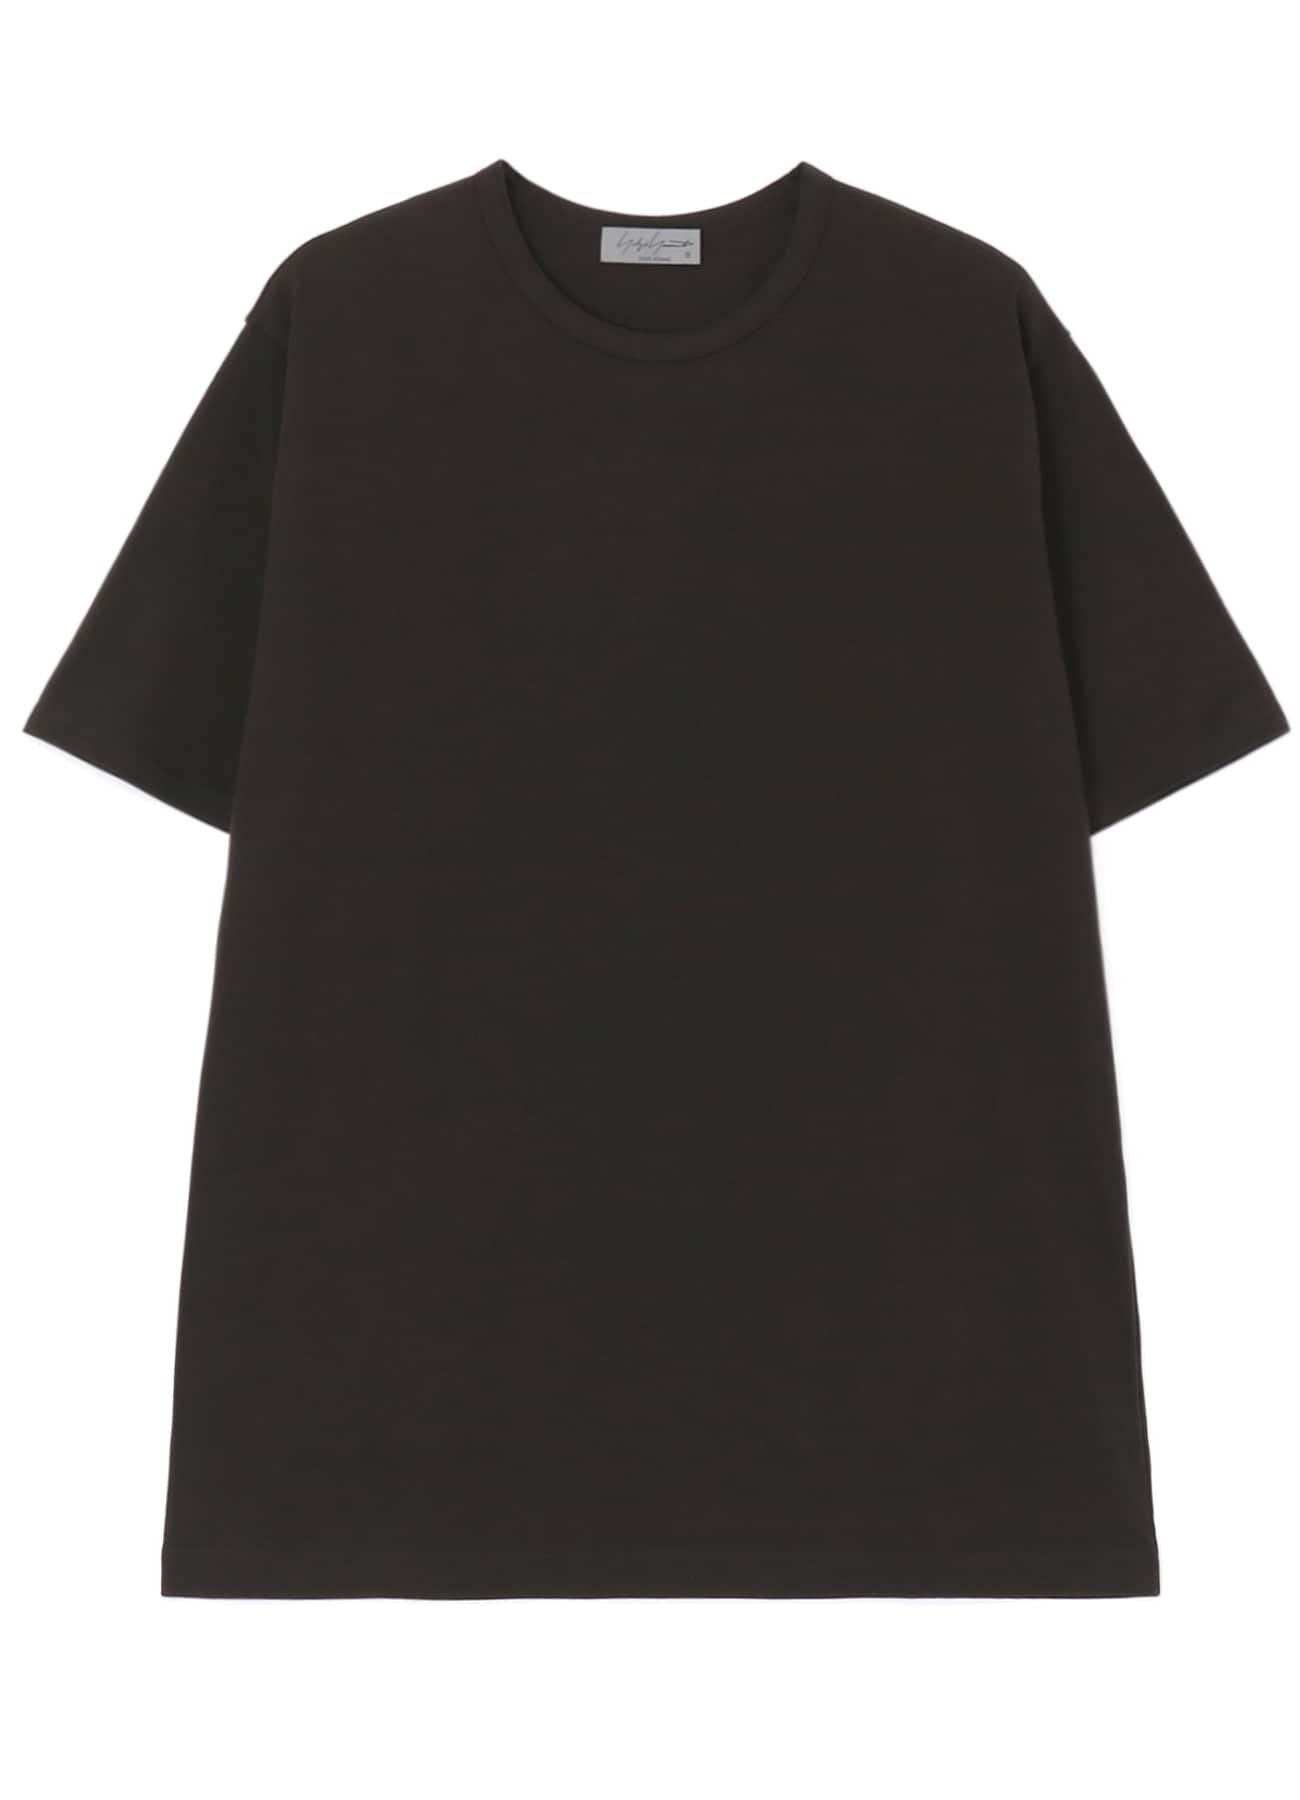 ULTIMA COTTON ROUND NECK TEE(FREE SIZE Charcoal): Vintage｜THE 